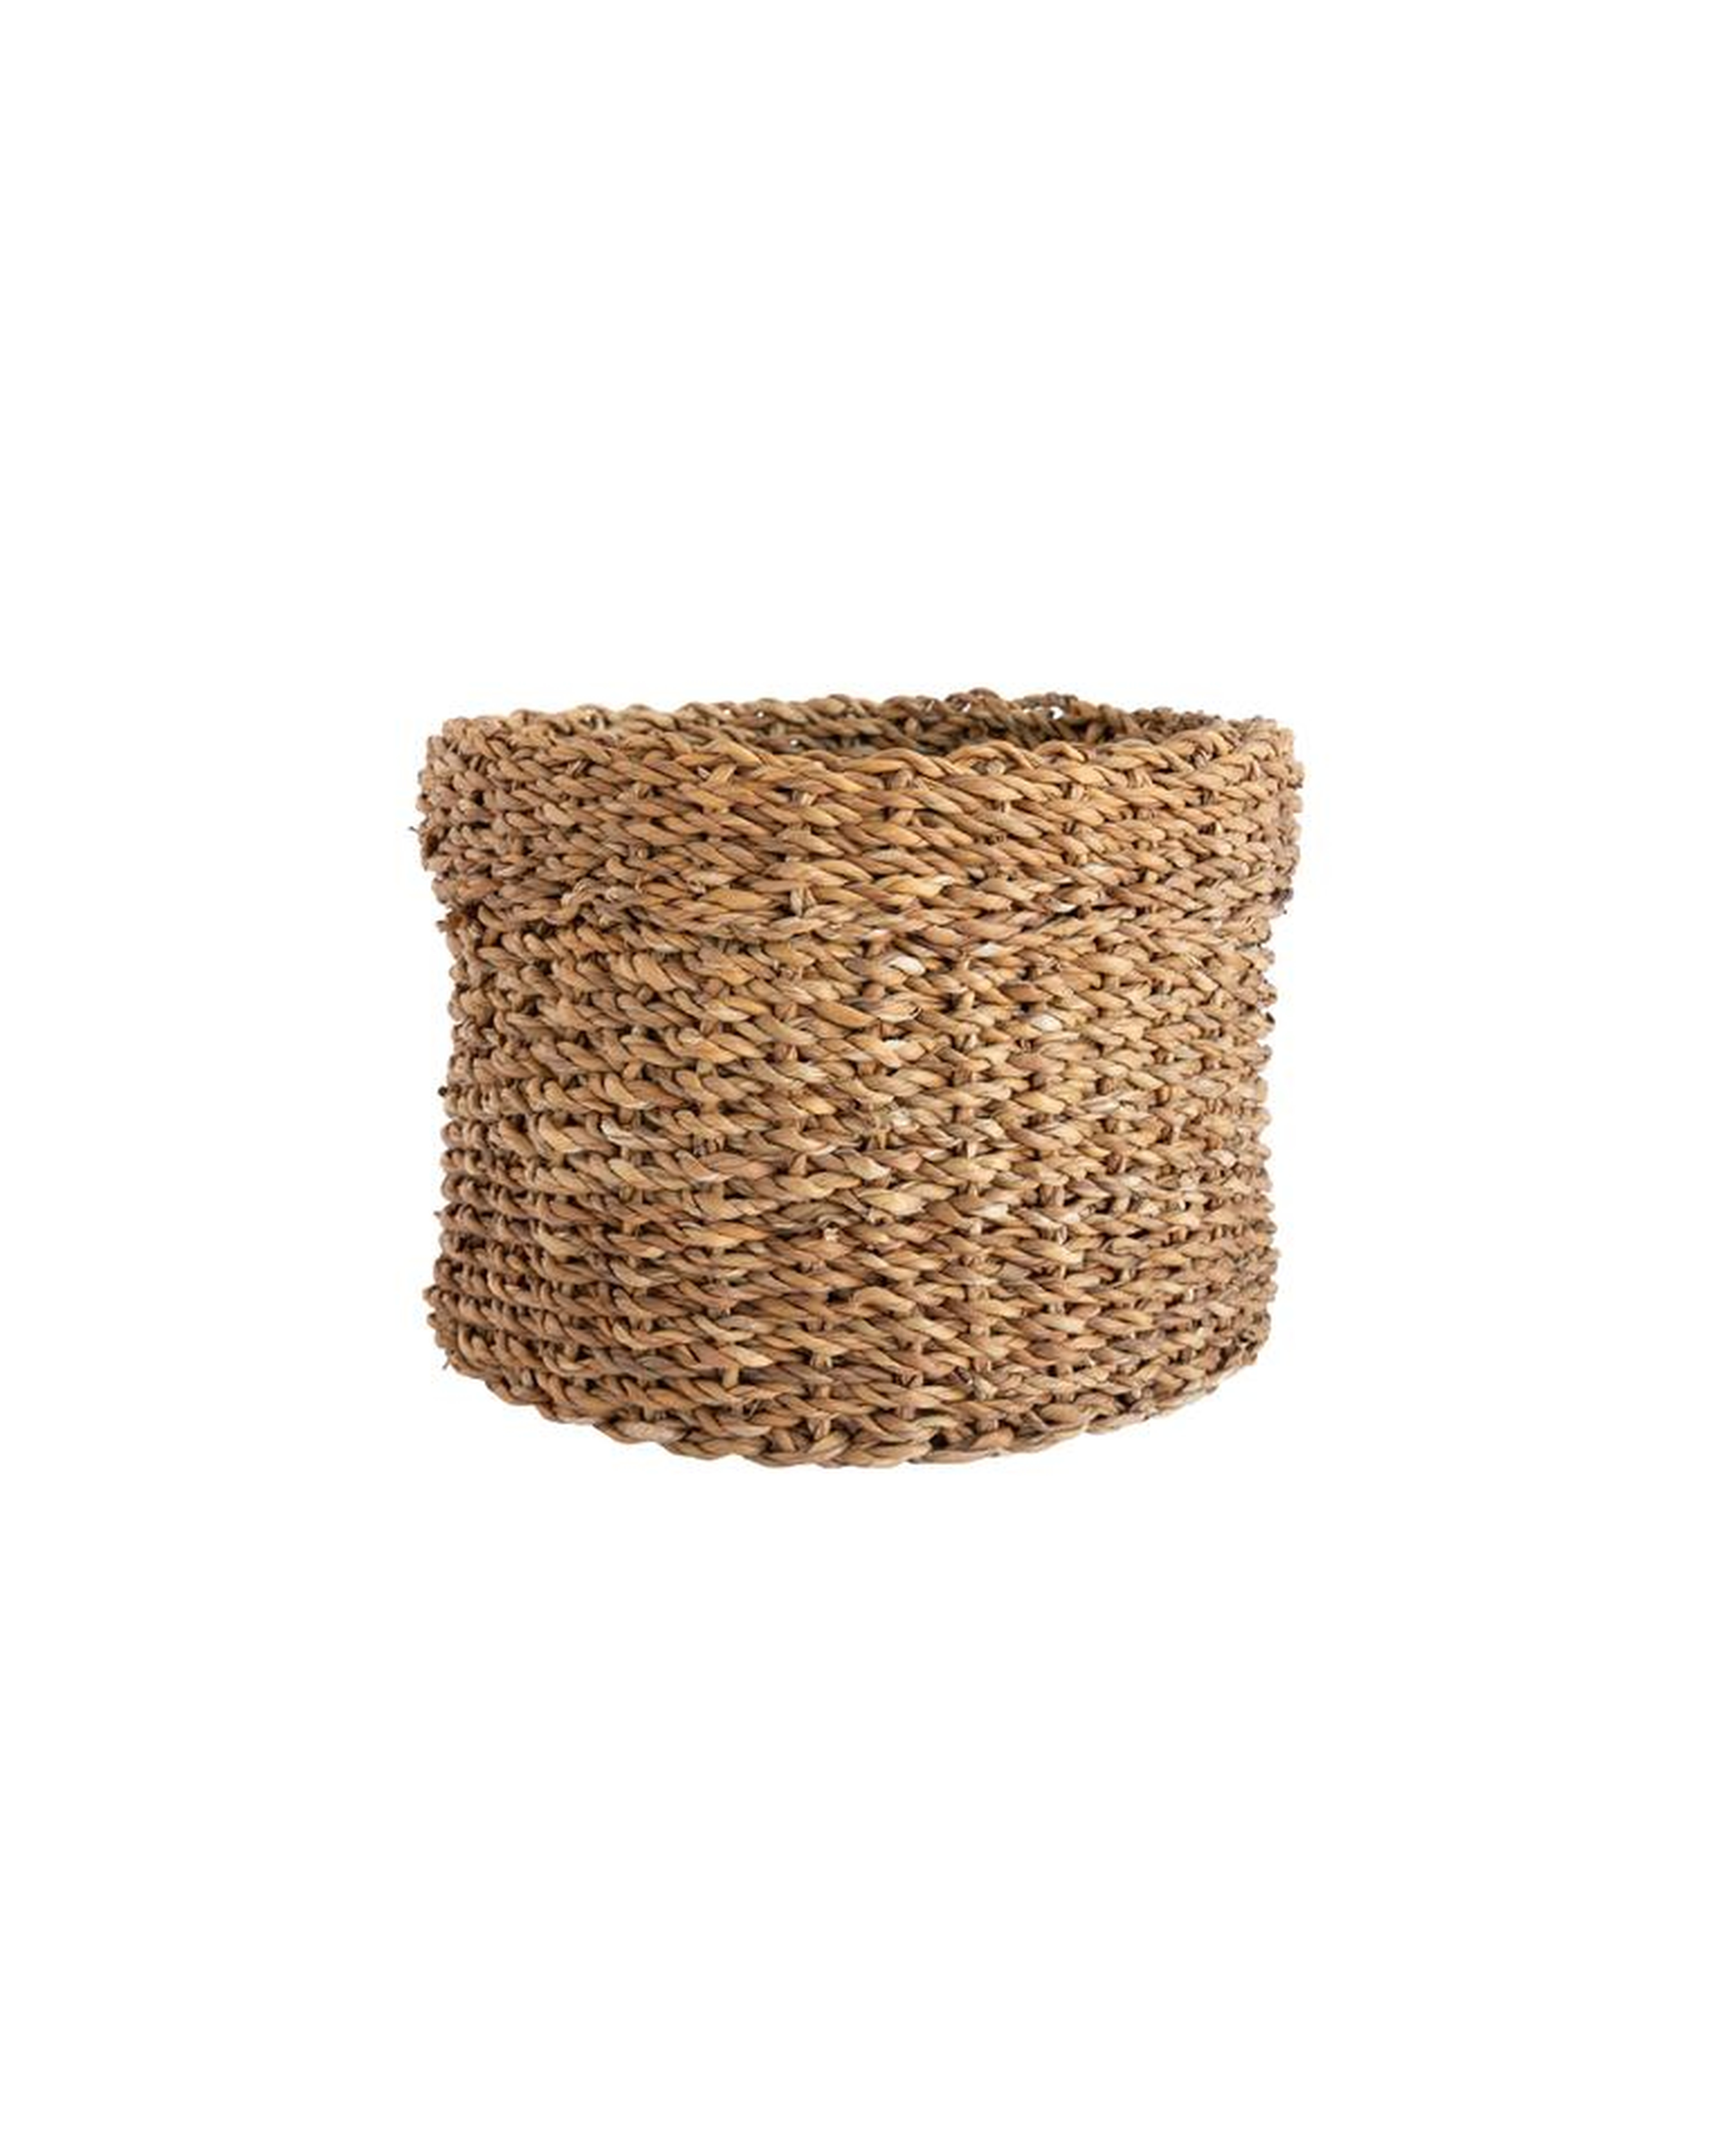 CUFFED SEAGRASS BASKET - SMALL - McGee & Co.